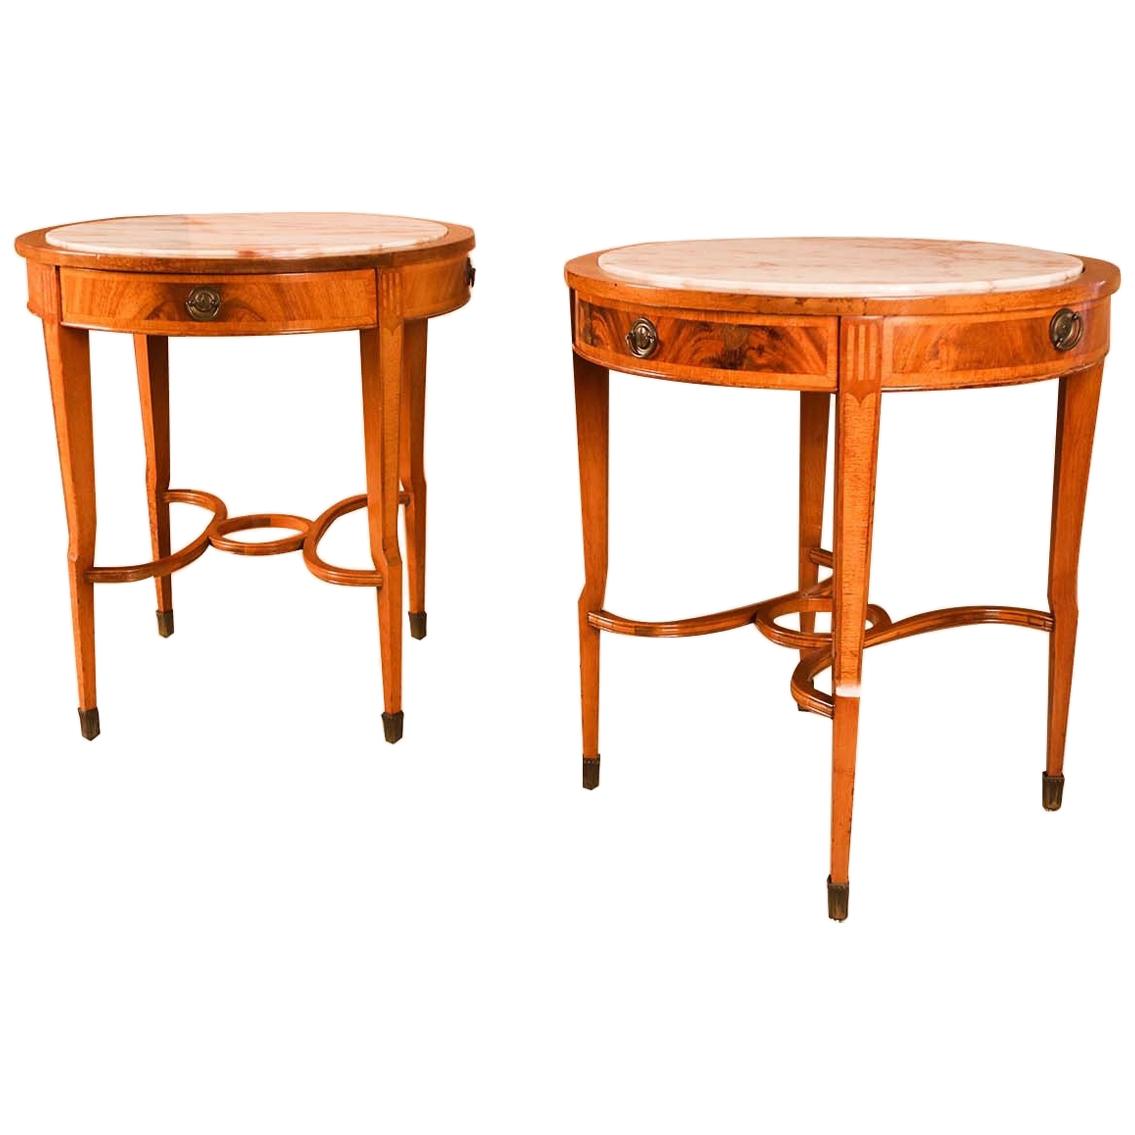 19th Century French Louis XVI Marble Top Sides Tables, Pair